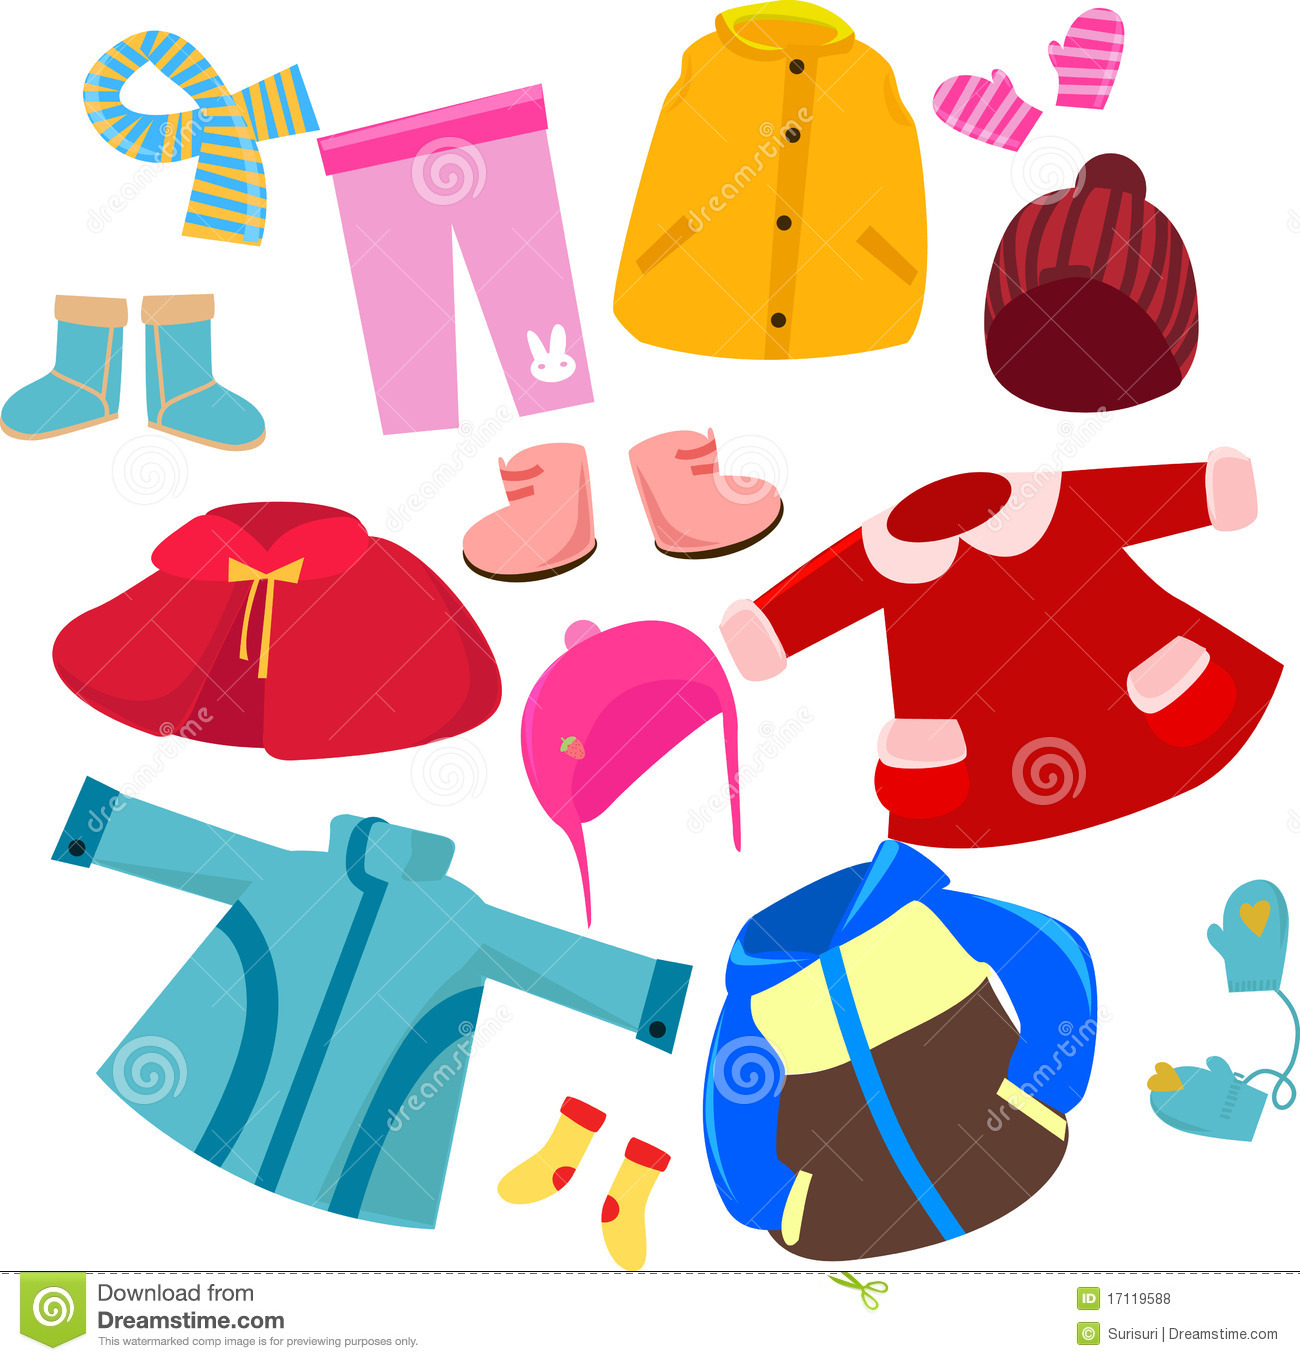 Clothing Clipart & Clothing Clip Art Images - HDClipartAll